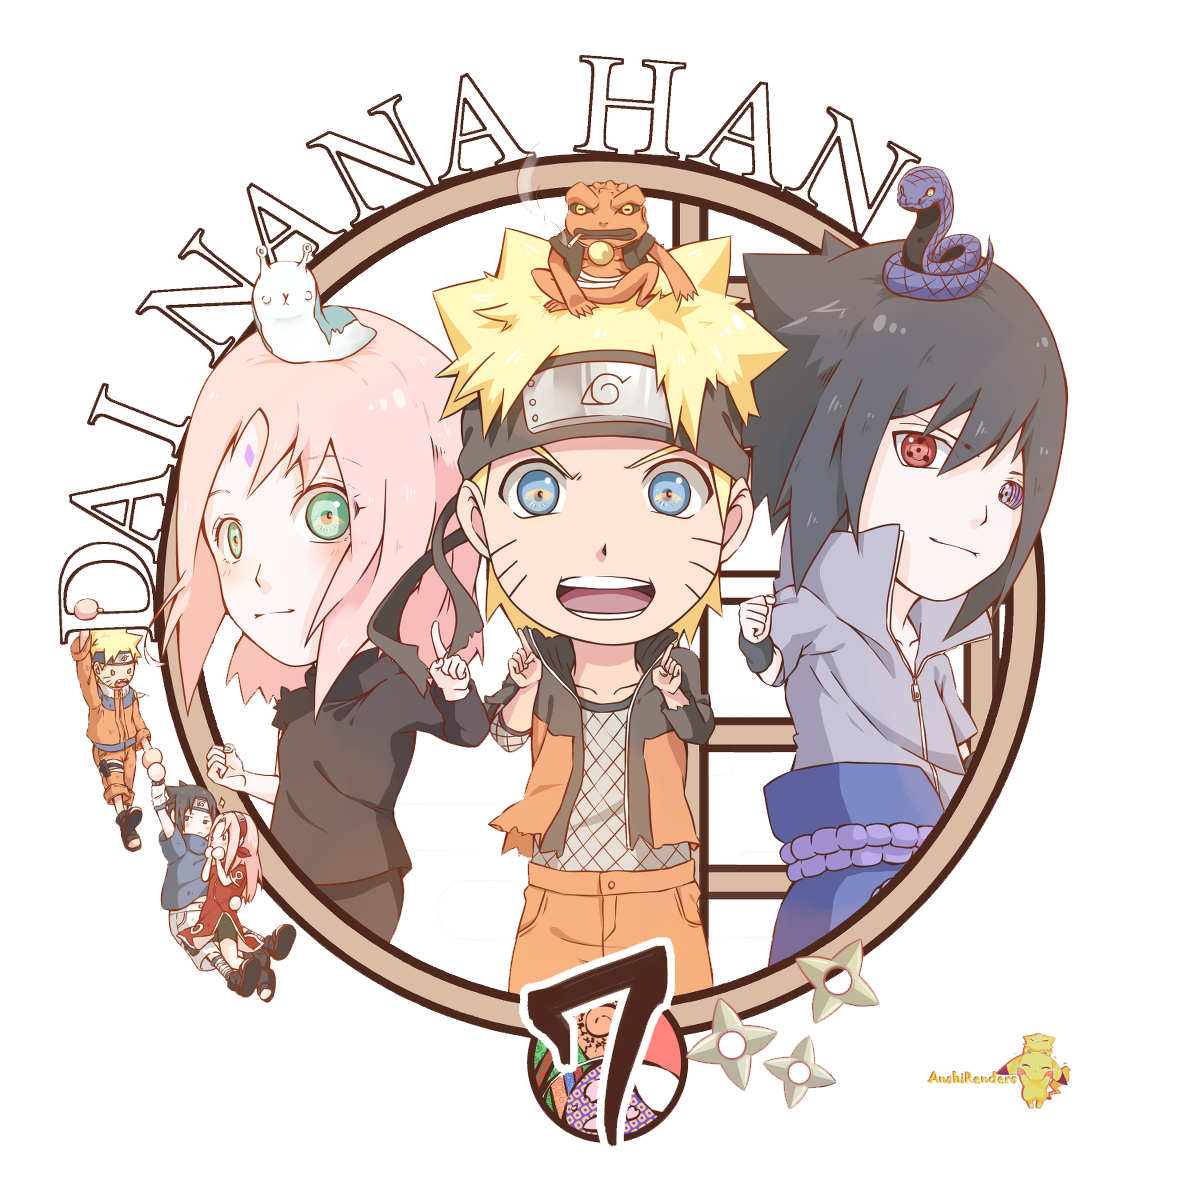 Equipo 7